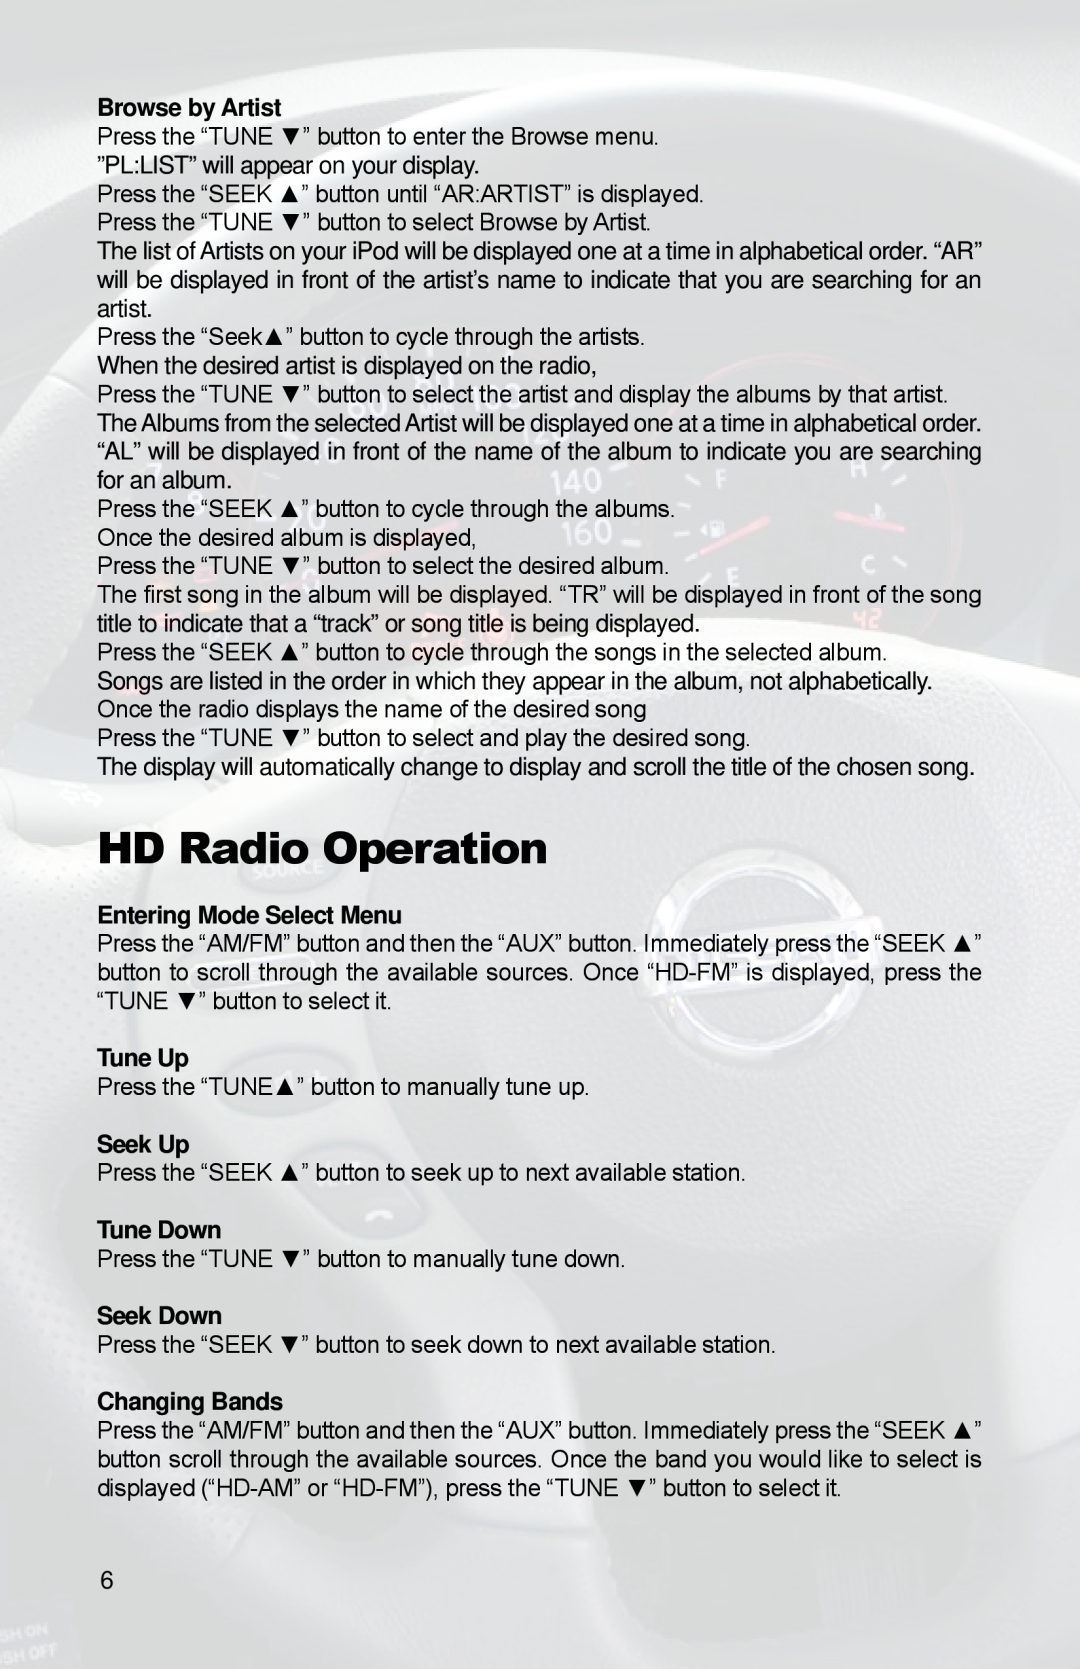 iSimple PGHNI2 HD Radio Operation, Browse by Artist, Entering Mode Select Menu, Tune Up, Seek Up, Tune Down, Seek Down 